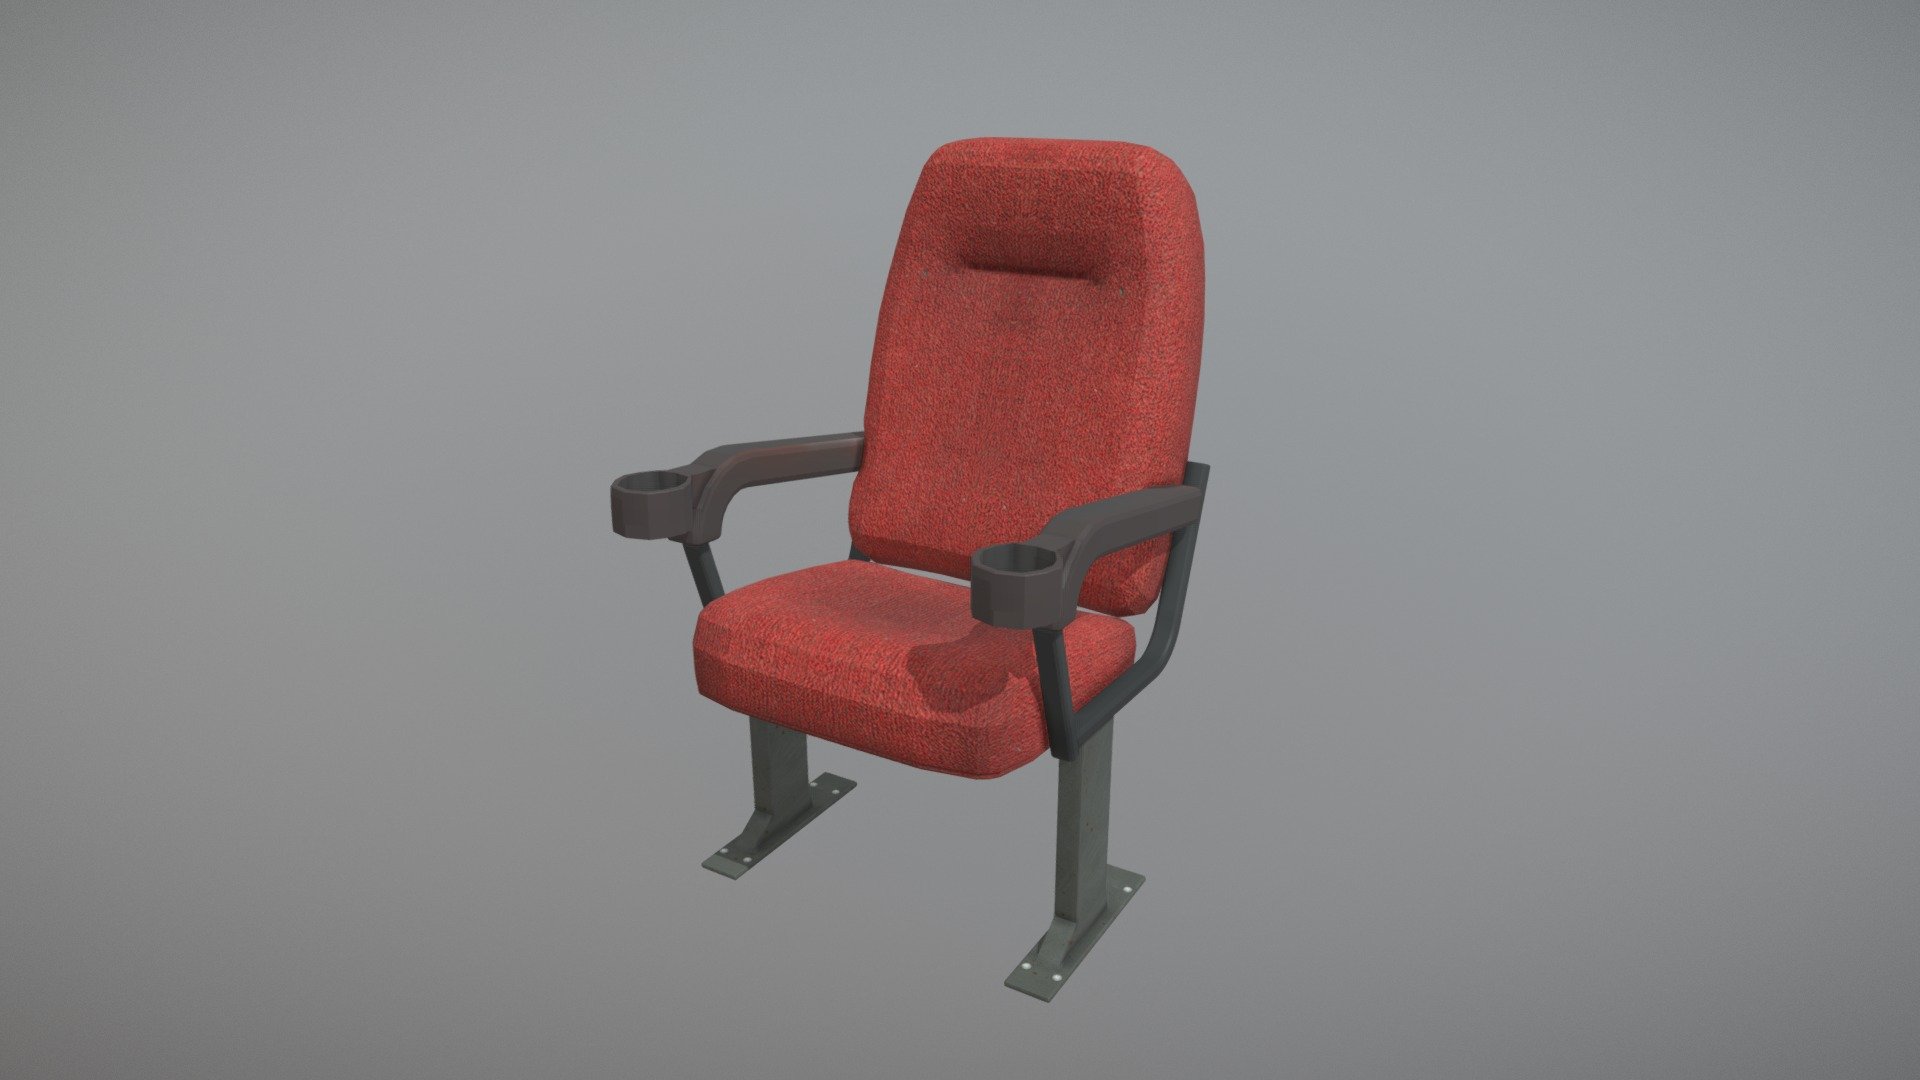 Movie Cinema Chair.
Made in 3D Studio Max 2011. Render and material in Vray.


In low poly, with unwrap and his texture. 
Available in other formats (3ds, obj, c4d, fbx)
Non-triangulated version available in .Max and 3ds format


If you liked my products, please, don't forget to rate it. That will help me a lot. Thanks! - Movie Cinema Chair - Buy Royalty Free 3D model by Gabriel Quintana (@gabrielquintana) 3d model